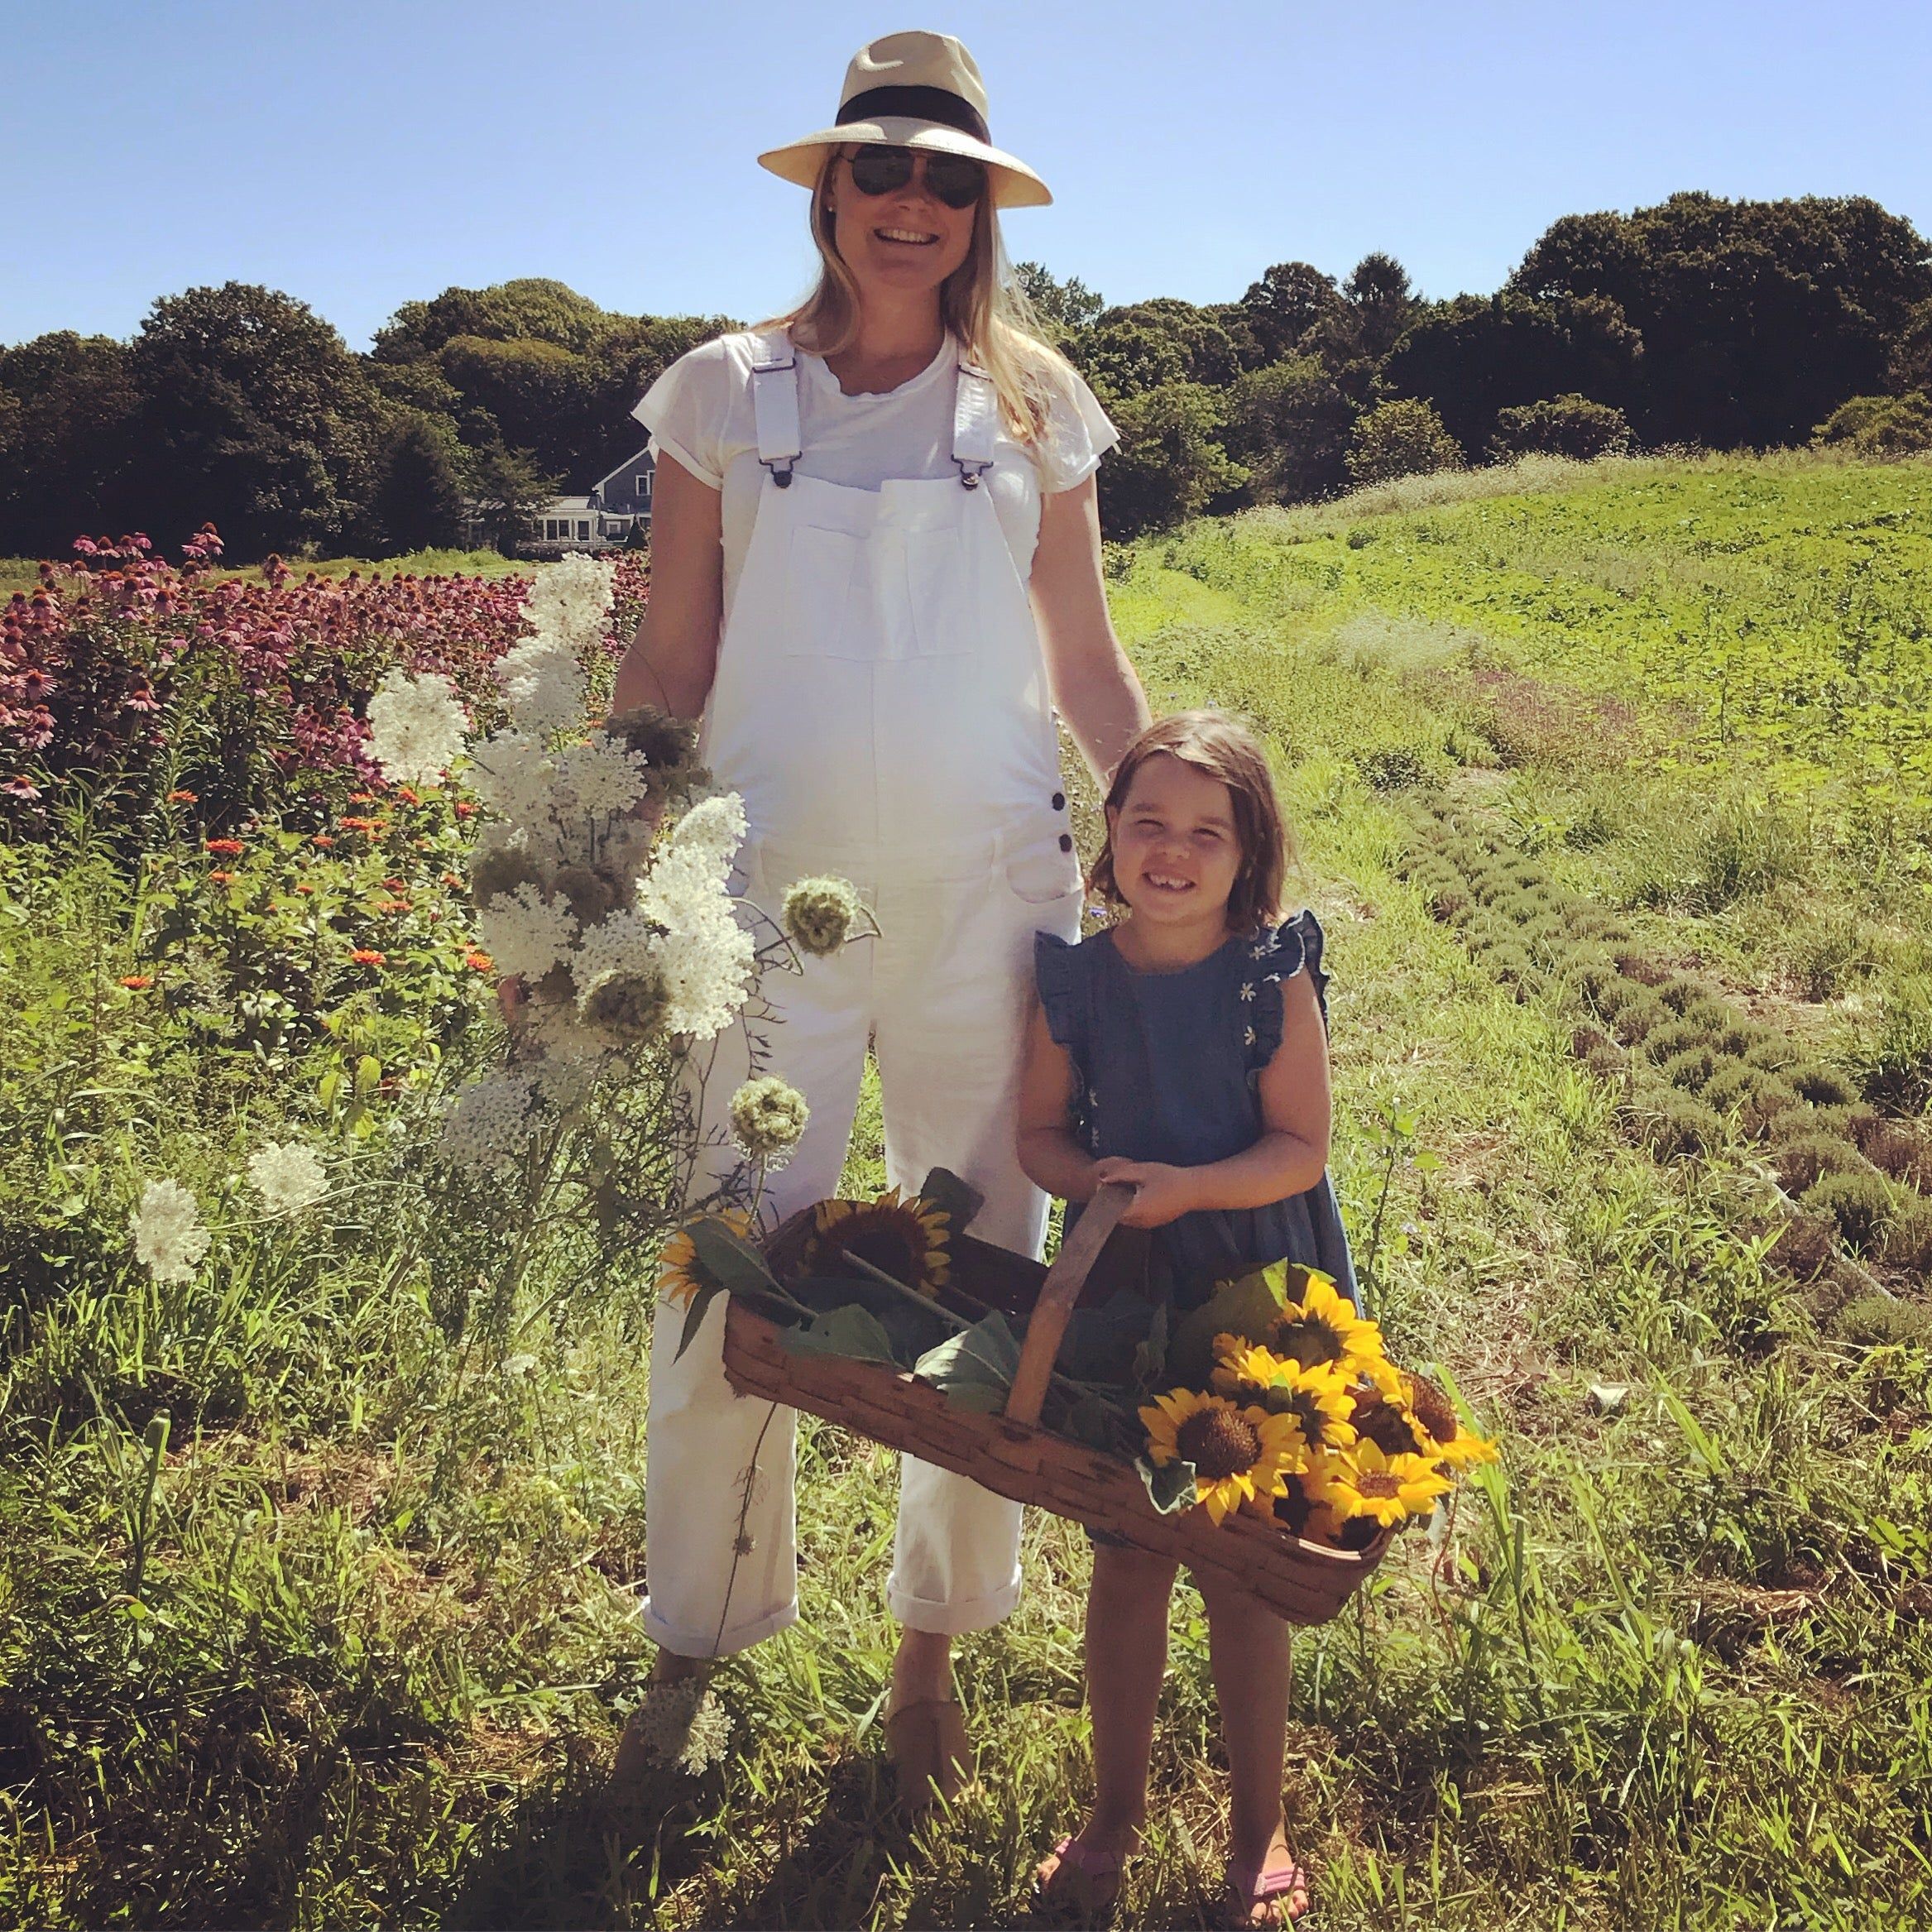 Kate and oldest daughter in a field of flowers